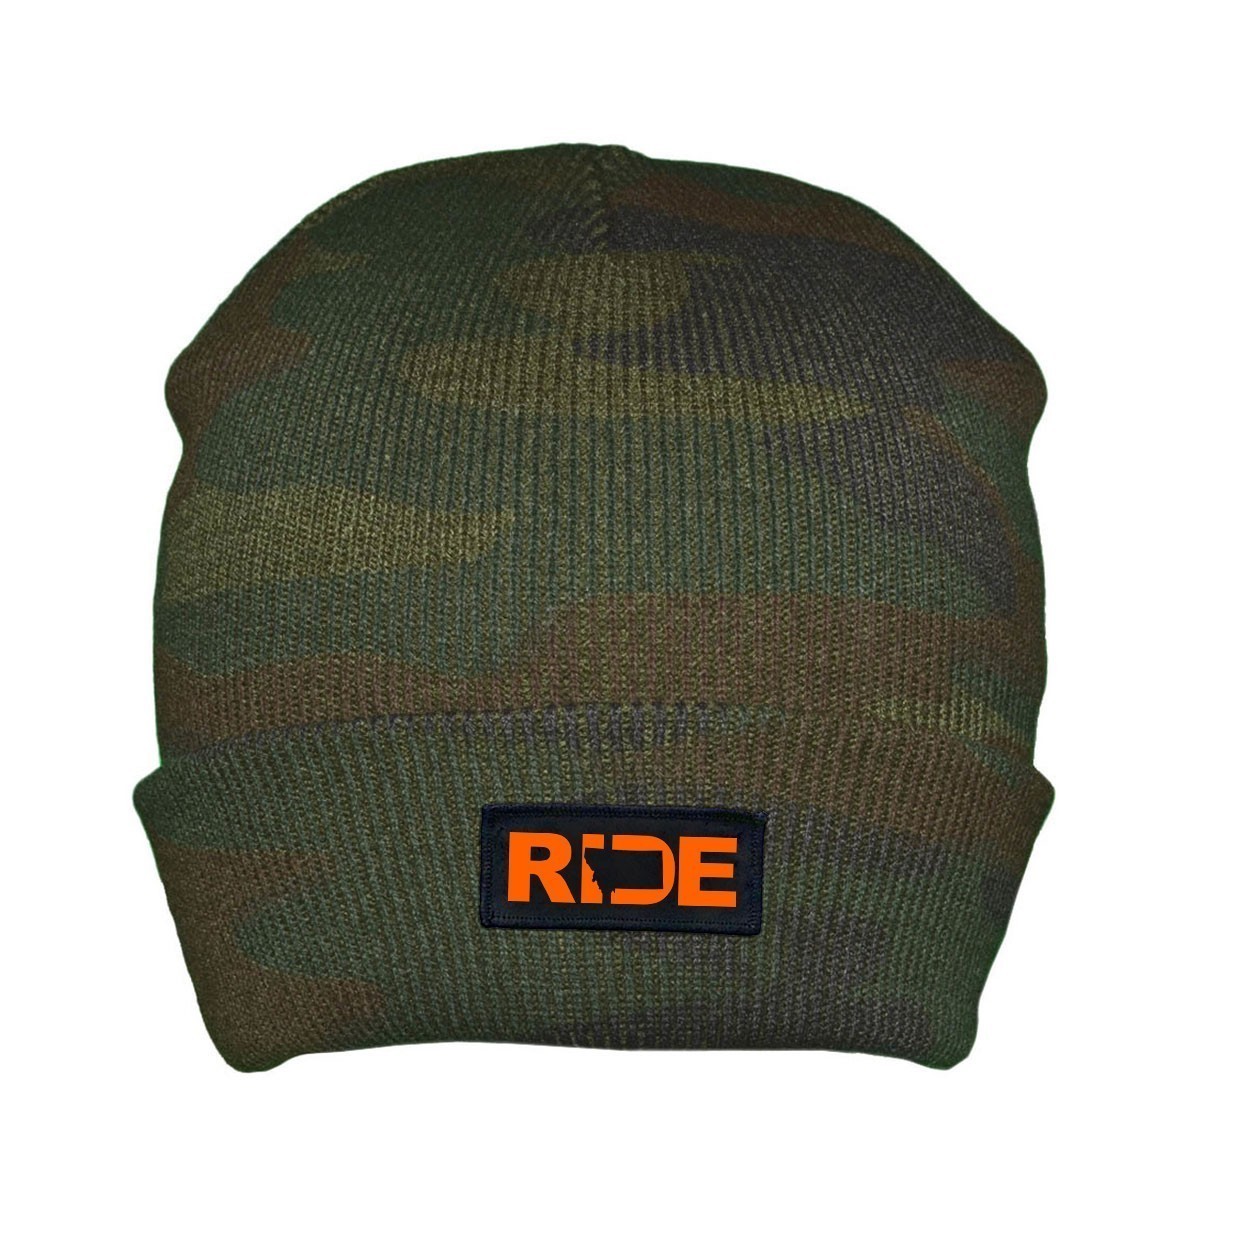 Ride Montana Night Out Woven Patch Roll Up Skully Beanie Camo (Orange Logo)